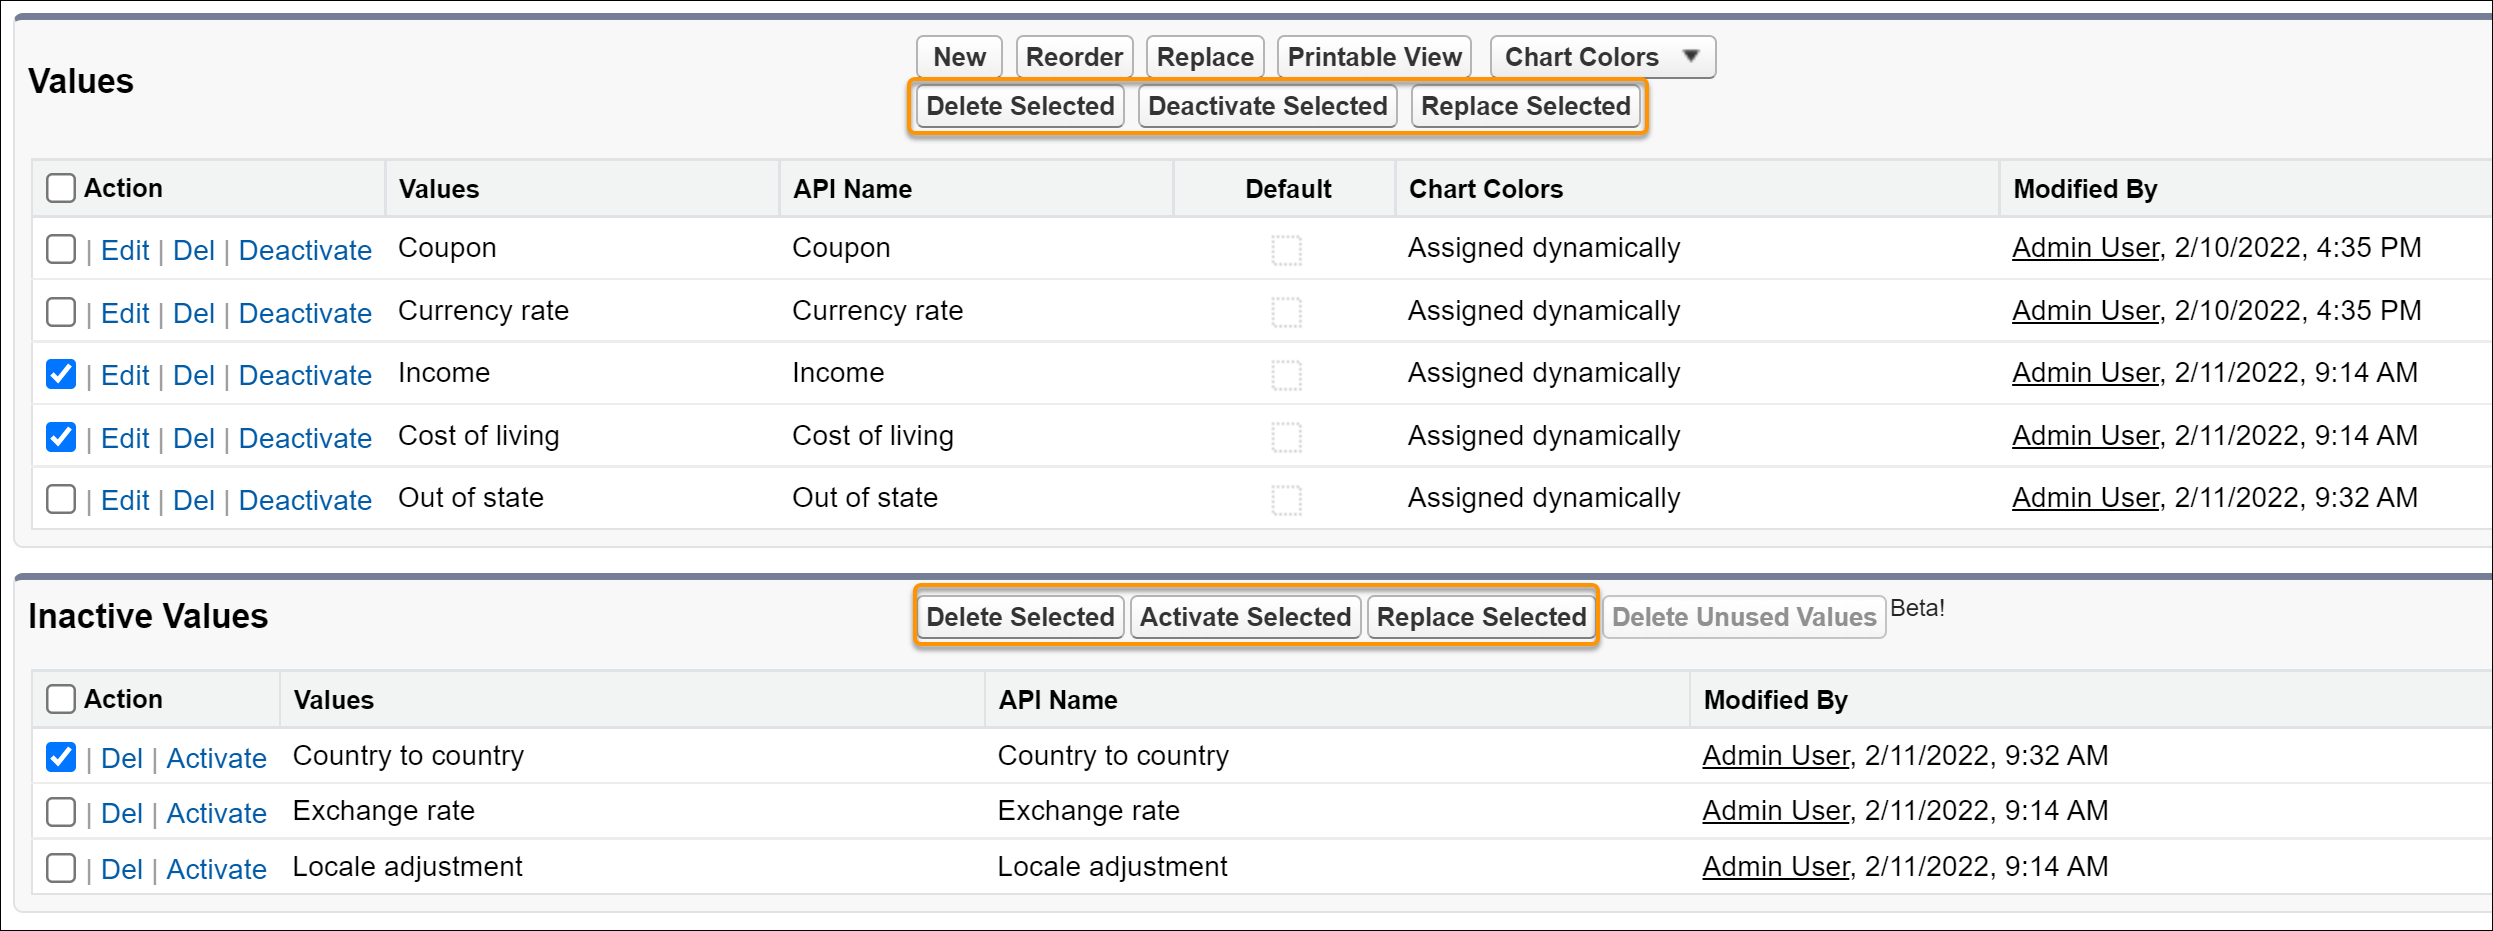 Salesforce Summer '22 Release  Features - The advanced picklist values management buttons in the Values and Inactive Values panes